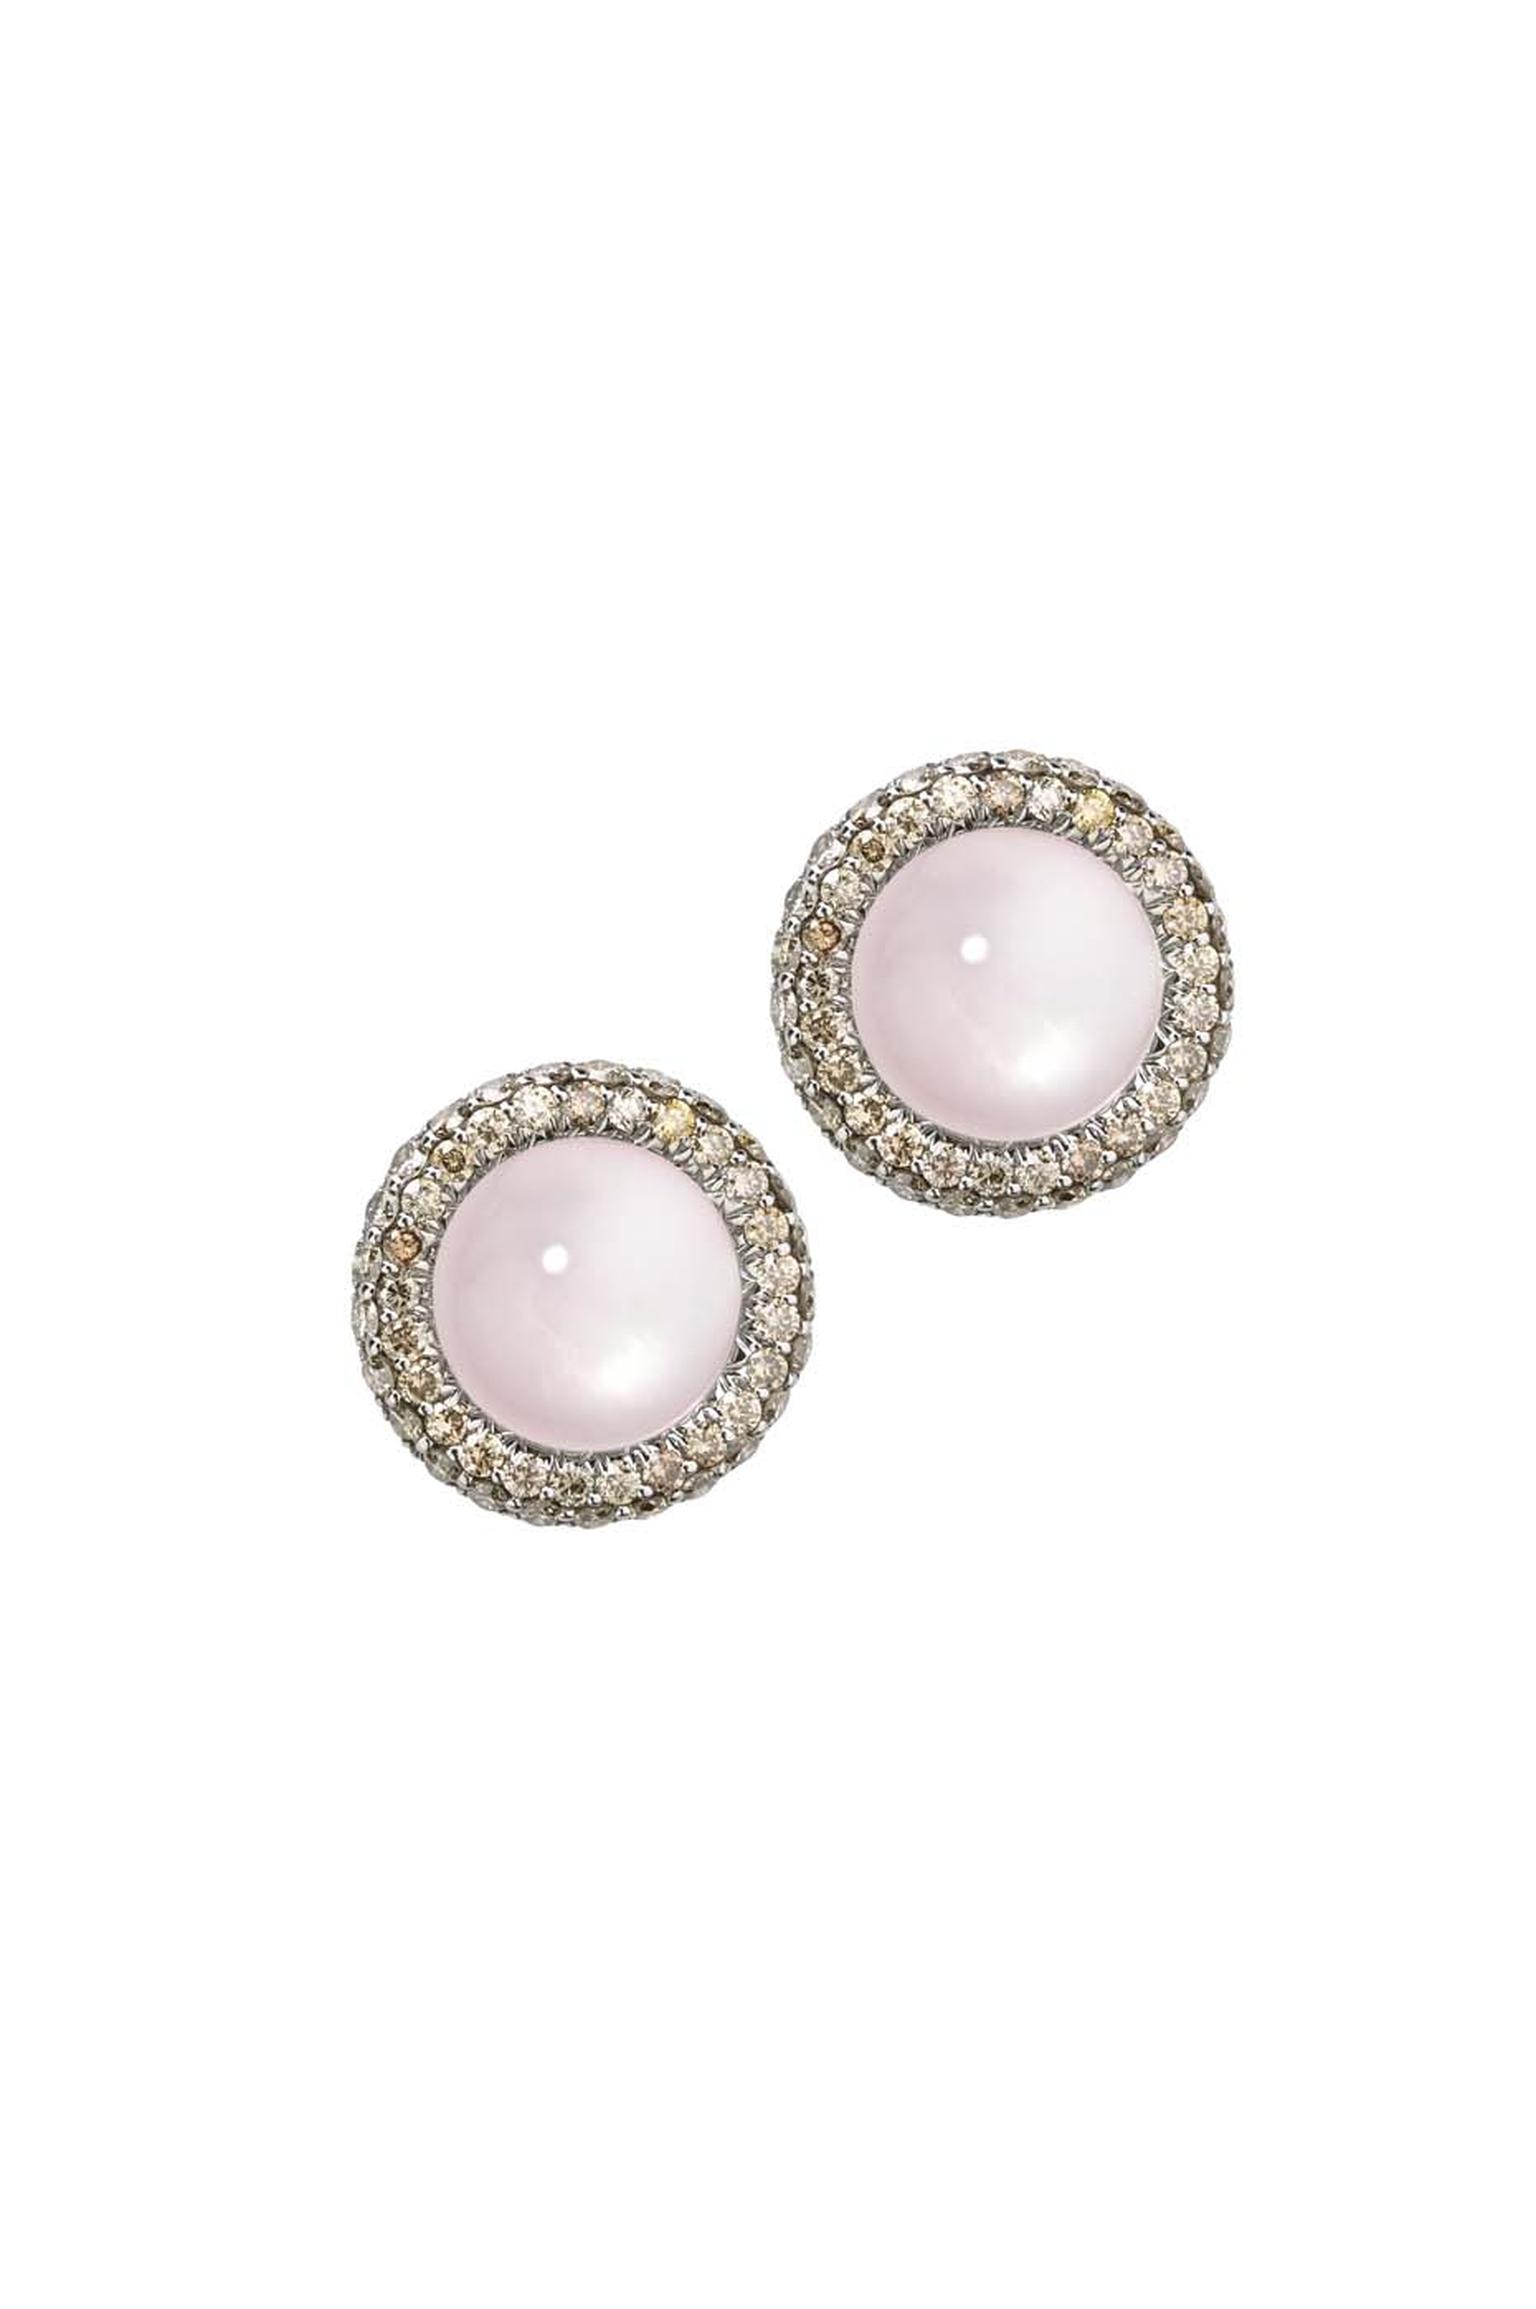 Elena Carrera earrings from the Celosías collection featuring yellow gold-plated silver with rose quartz and diamonds.